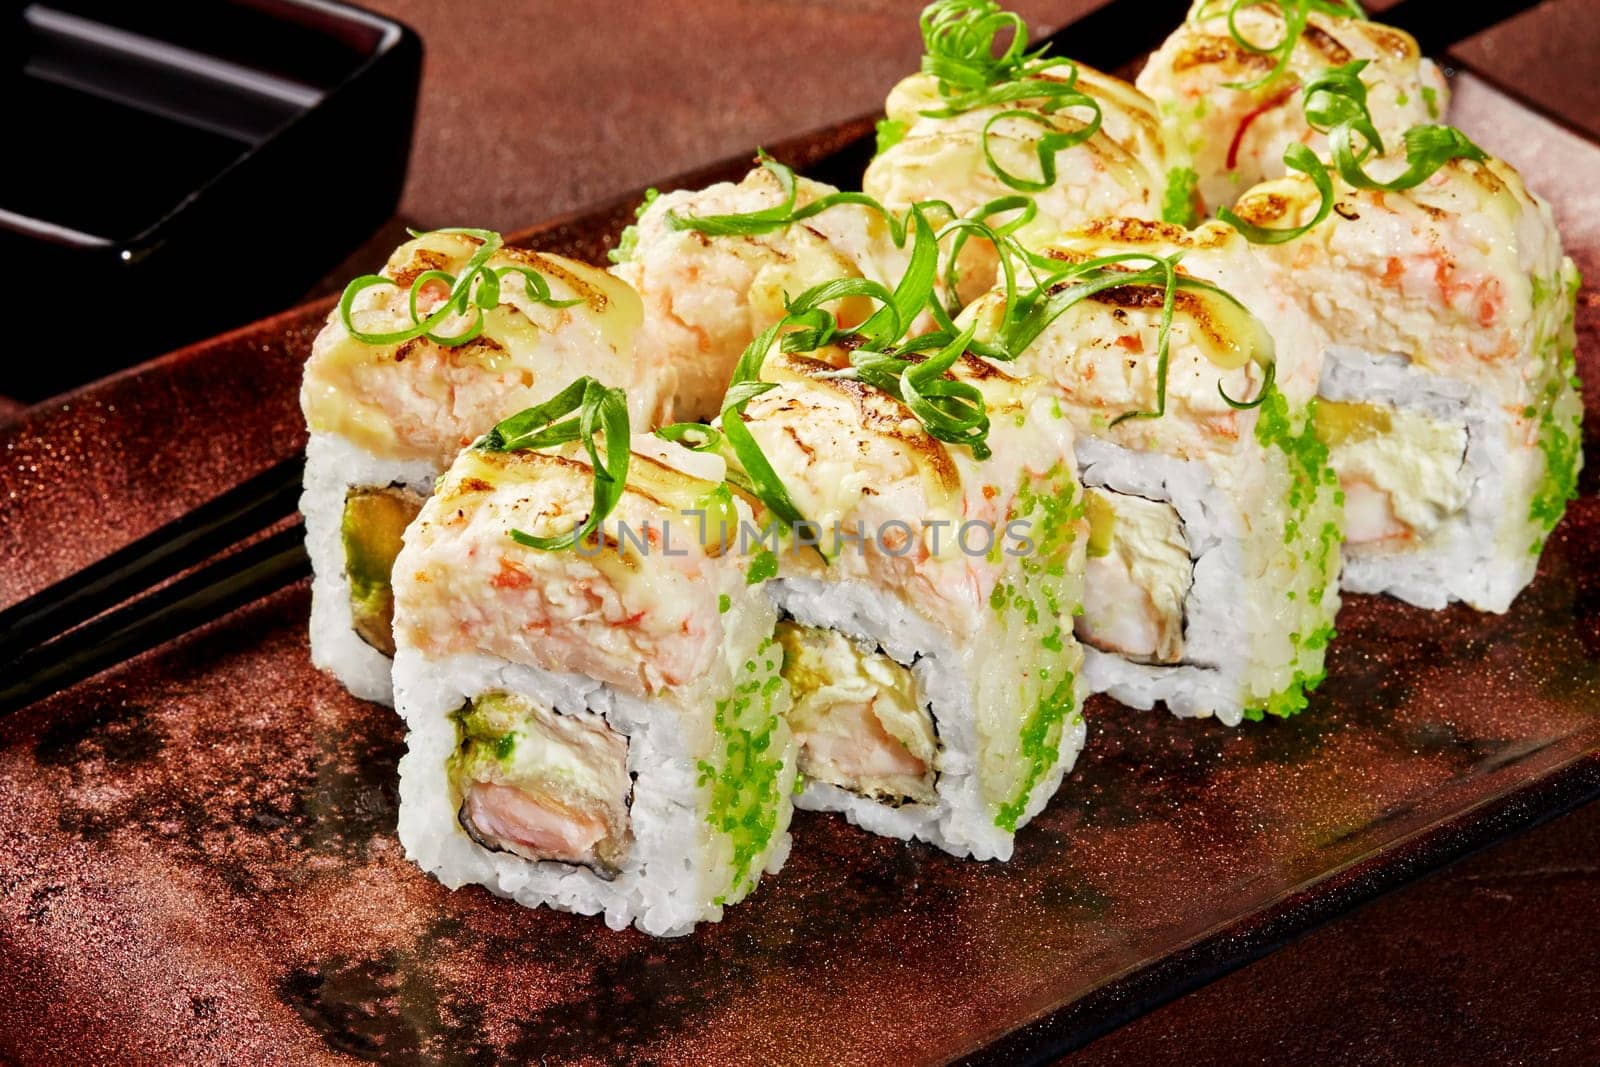 Close-up of uramaki sushi rolls coated with green tobiko filled with shrimp, avocado and cream cheese topped with spicy sauce and greens, traditionally served with soy sauce on ceramic plate